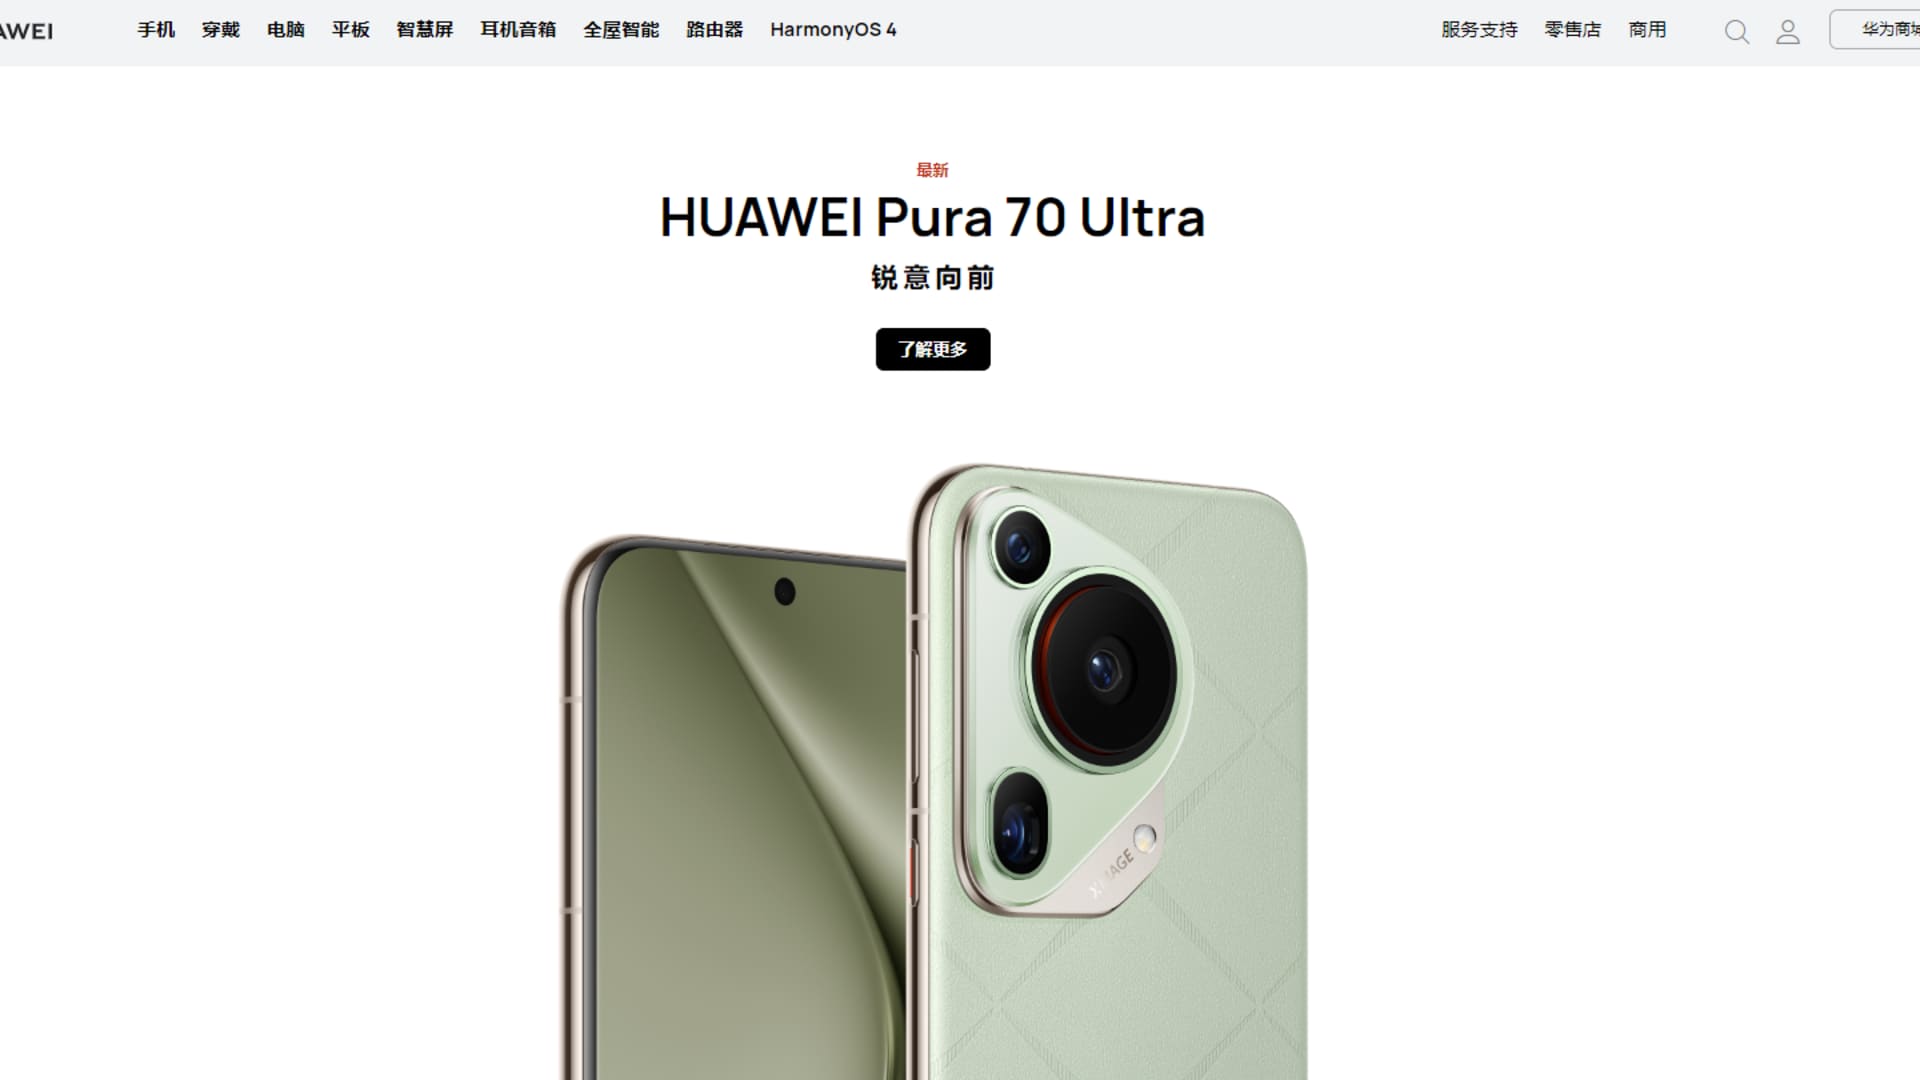 Just after chip breakthrough, Huawei launches new lineup of phones to problem Apple in China